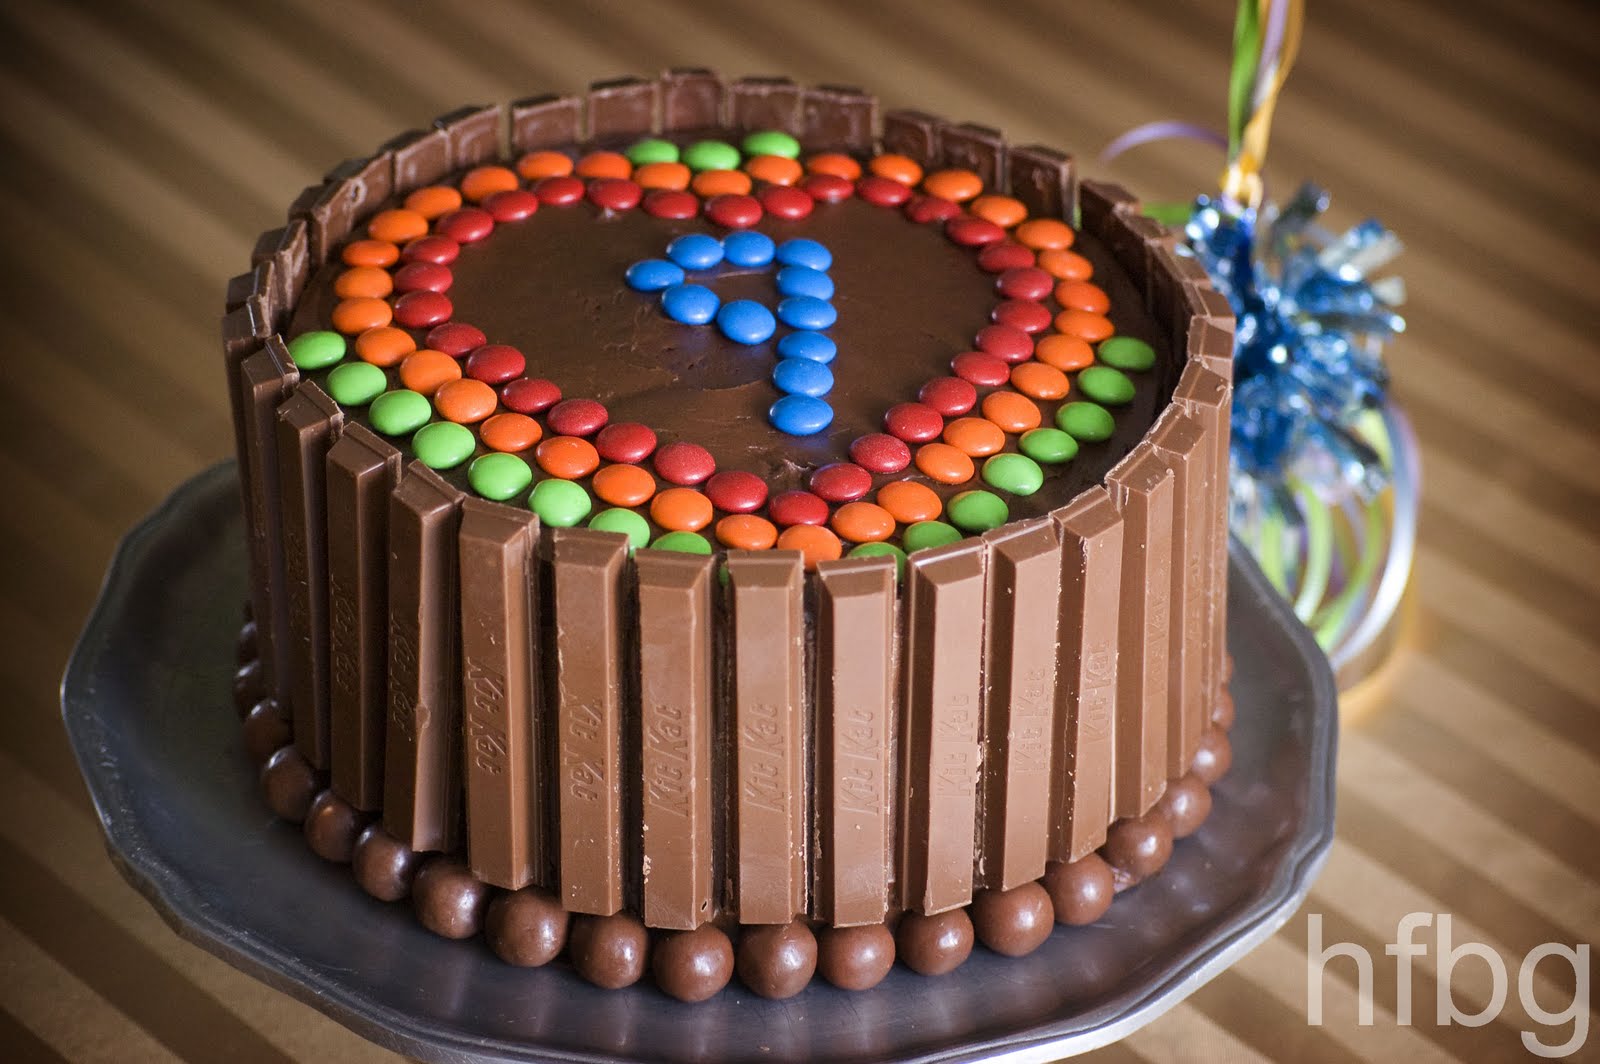 How to Make Number Birthday Cakes